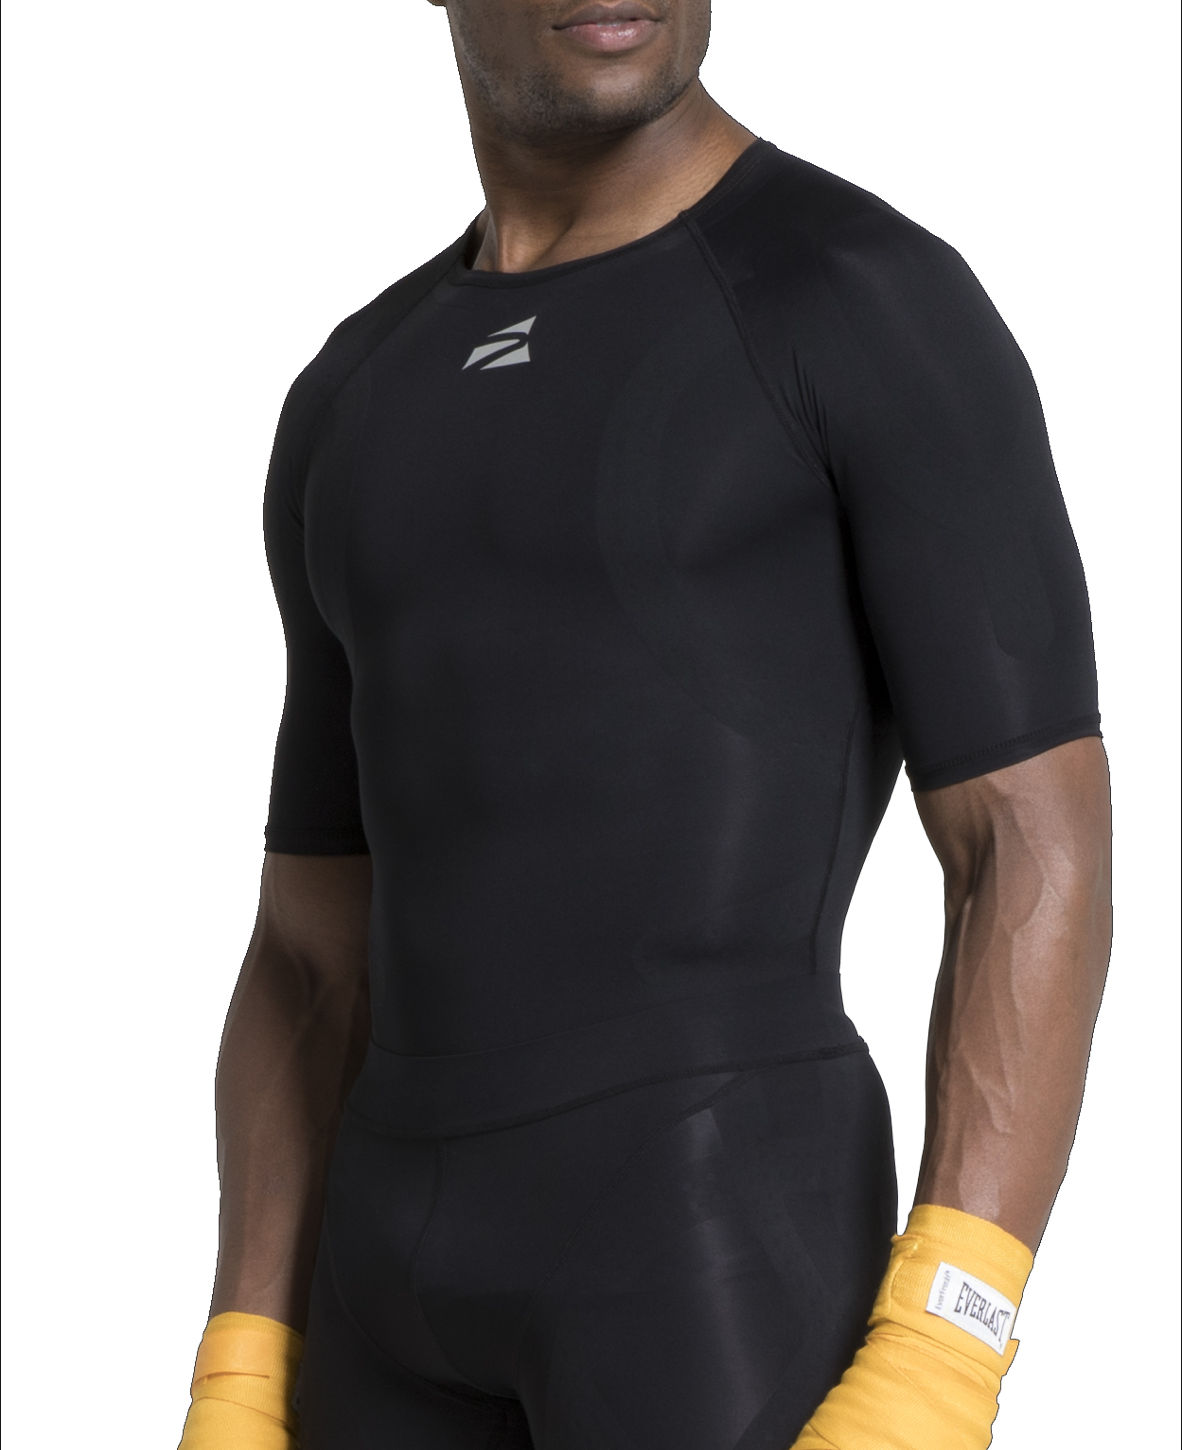 Enerskin, Compression Clothes